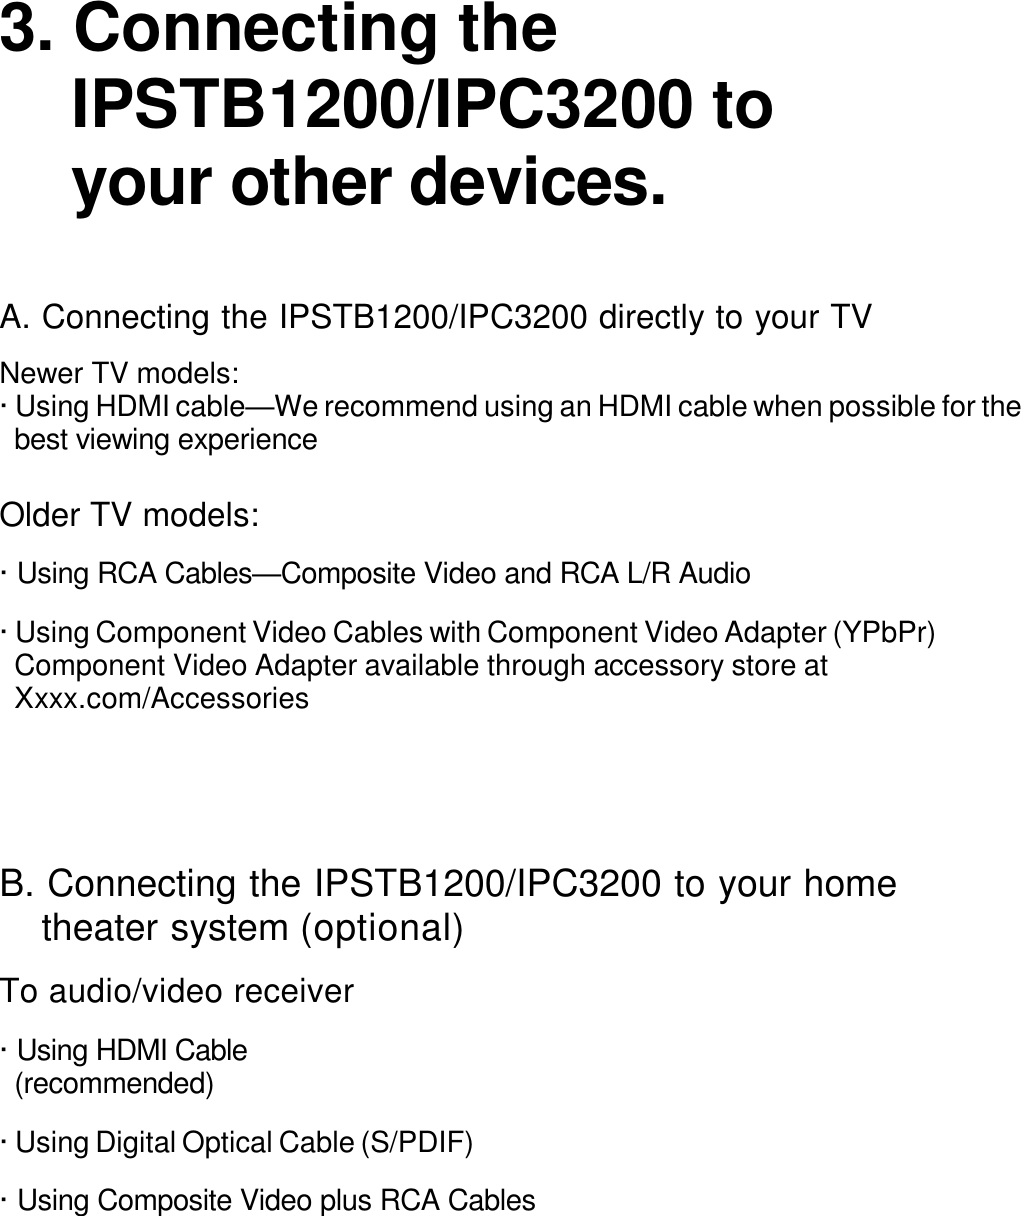   3. Connecting the IPSTB1200/IPC3200 to your other devices.   A. Connecting the IPSTB1200/IPC3200 directly to your TV  Newer TV models: · Using HDMI cable—We recommend using an HDMI cable when possible for the best viewing experience  Older TV models:  · Using RCA Cables—Composite Video and RCA L/R Audio  · Using Component Video Cables with Component Video Adapter (YPbPr) Component Video Adapter available through accessory store at Xxxx.com/Accessories      B. Connecting the IPSTB1200/IPC3200 to your home theater system (optional)  To audio/video receiver  · Using HDMI Cable (recommended)  · Using Digital Optical Cable (S/PDIF)  · Using Composite Video plus RCA Cables 